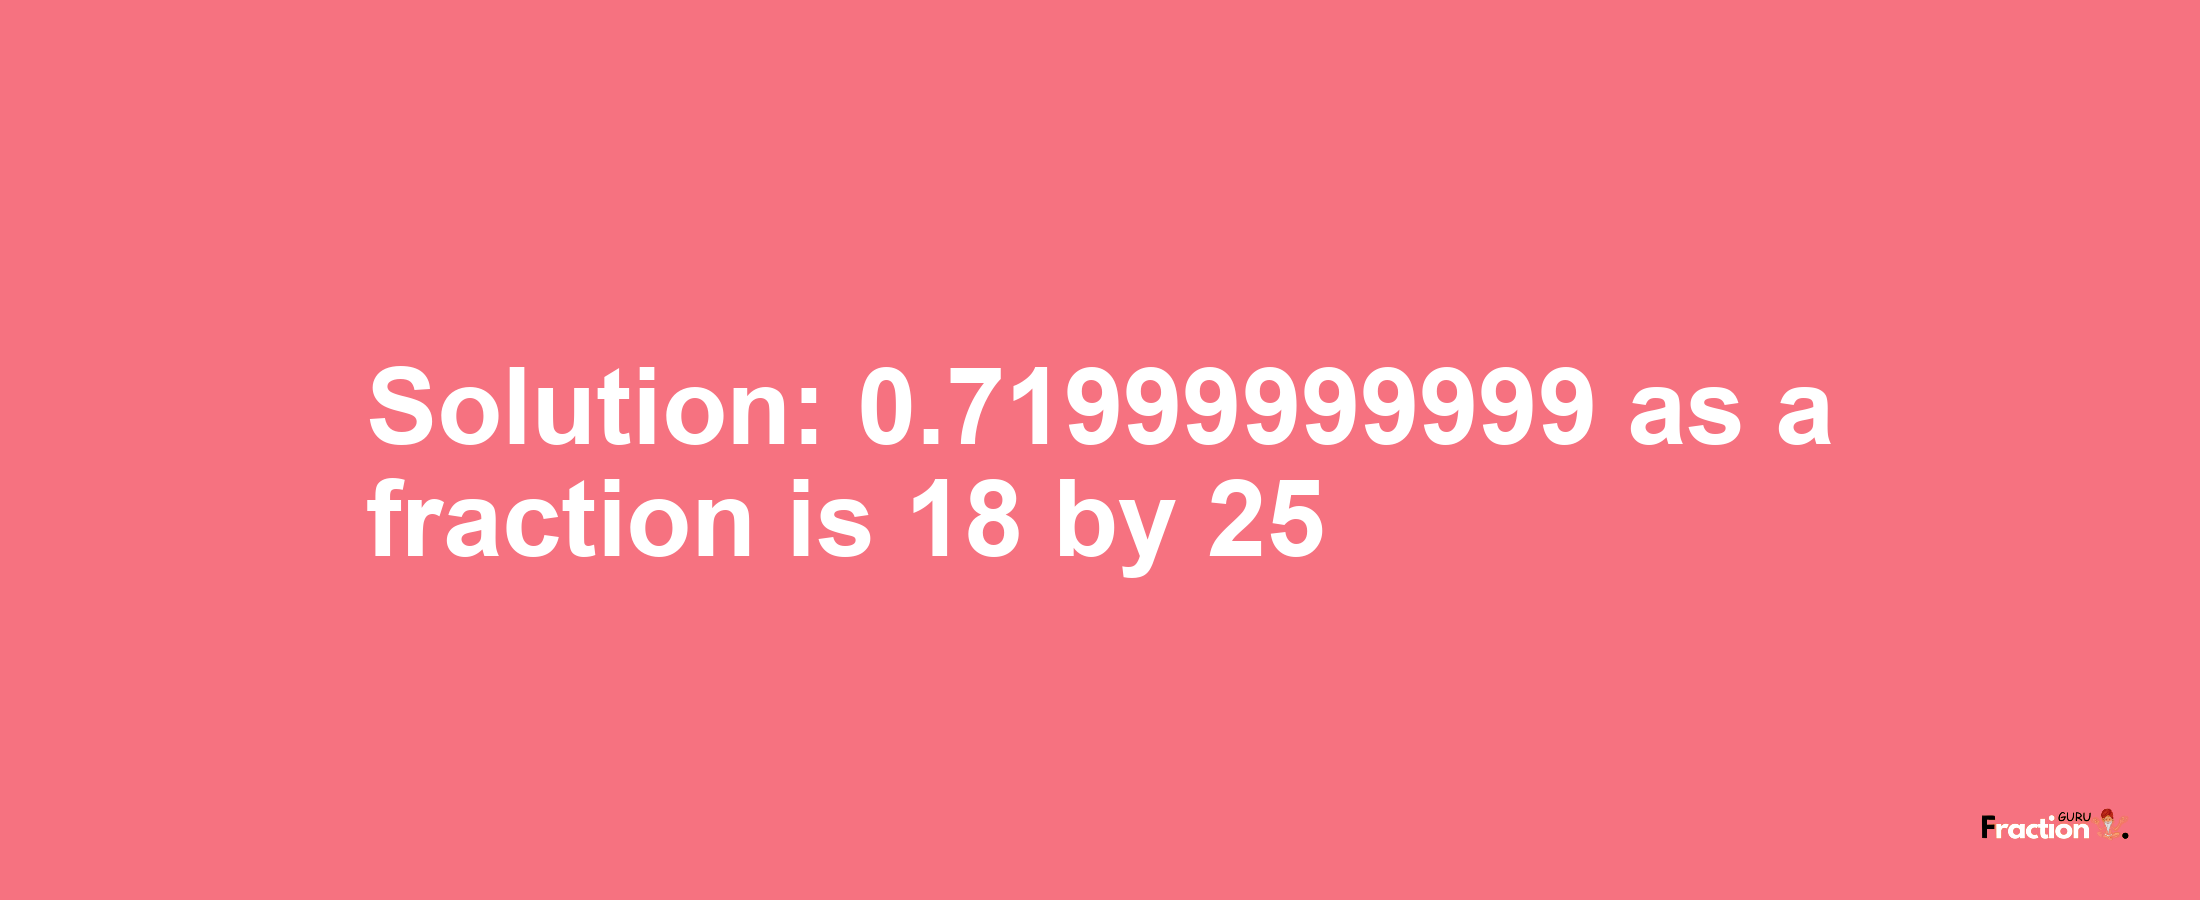 Solution:0.71999999999 as a fraction is 18/25